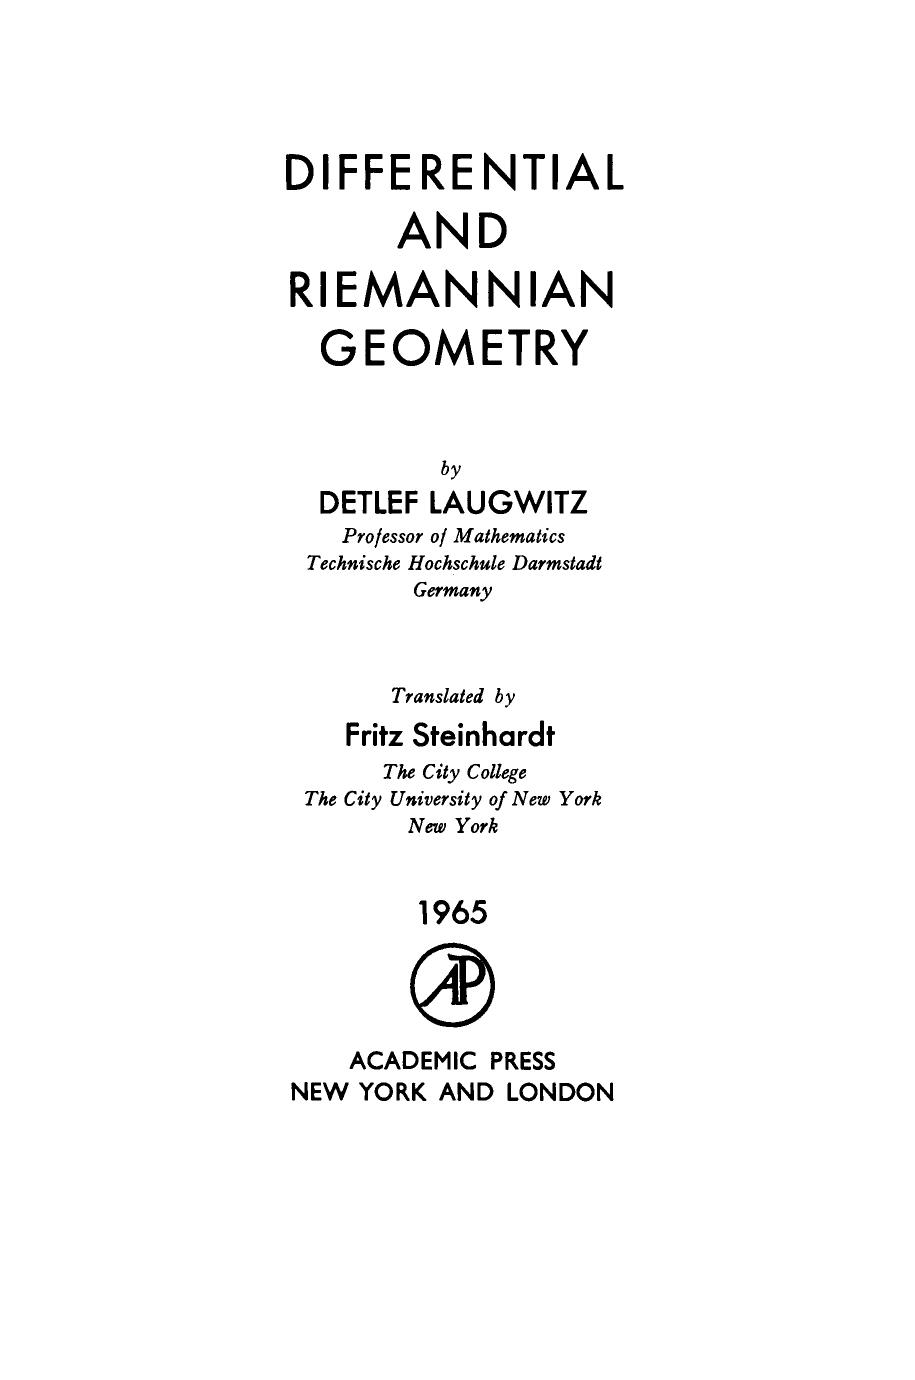 Differential and Riemannian Geometry